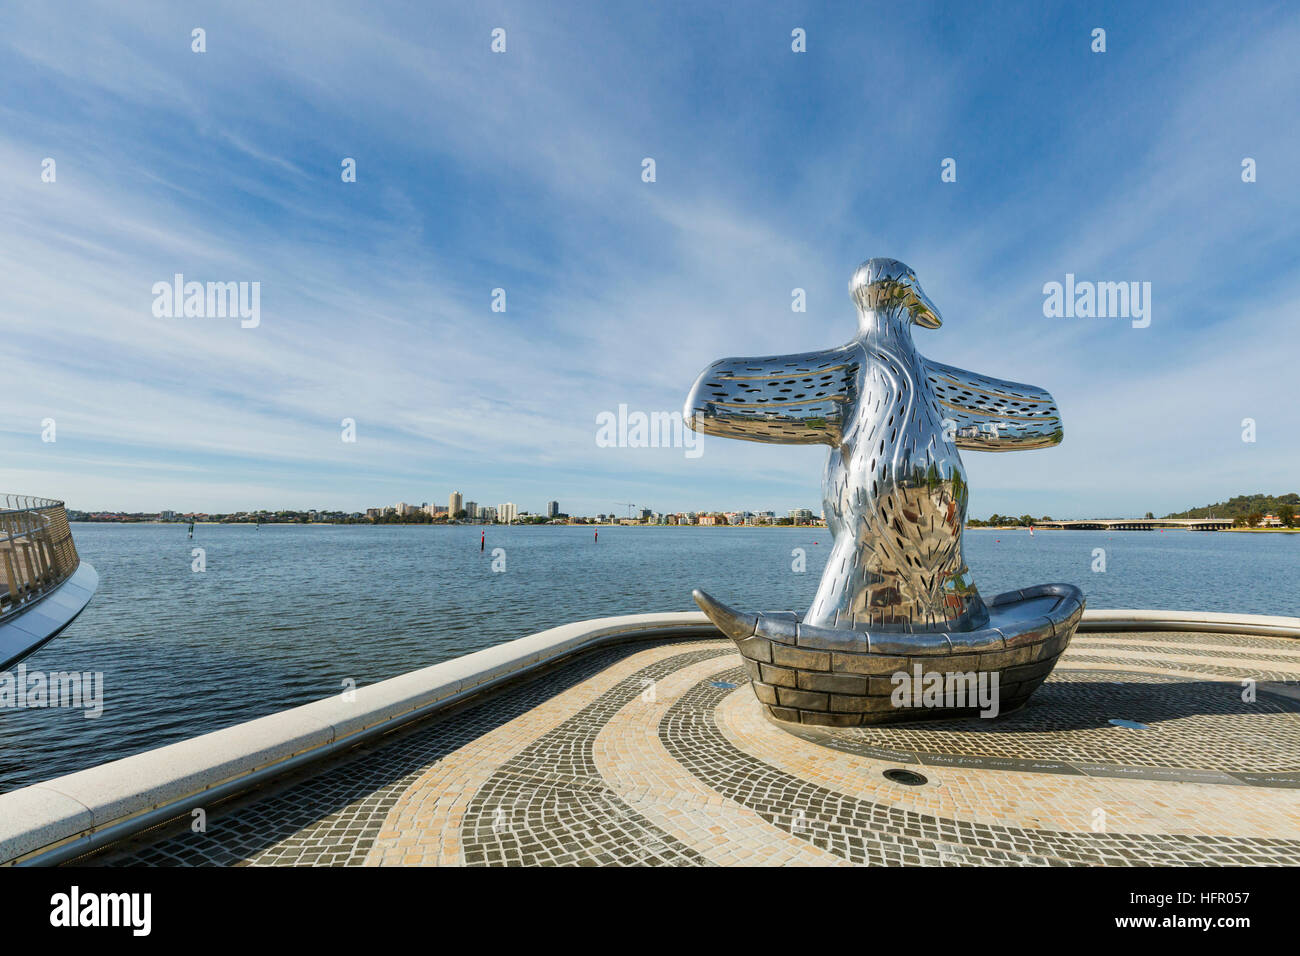 The First Contact sculpture on the Swan River waterfront at Elizabeth Quay.  Perth, Western Australia, Australia Stock Photo